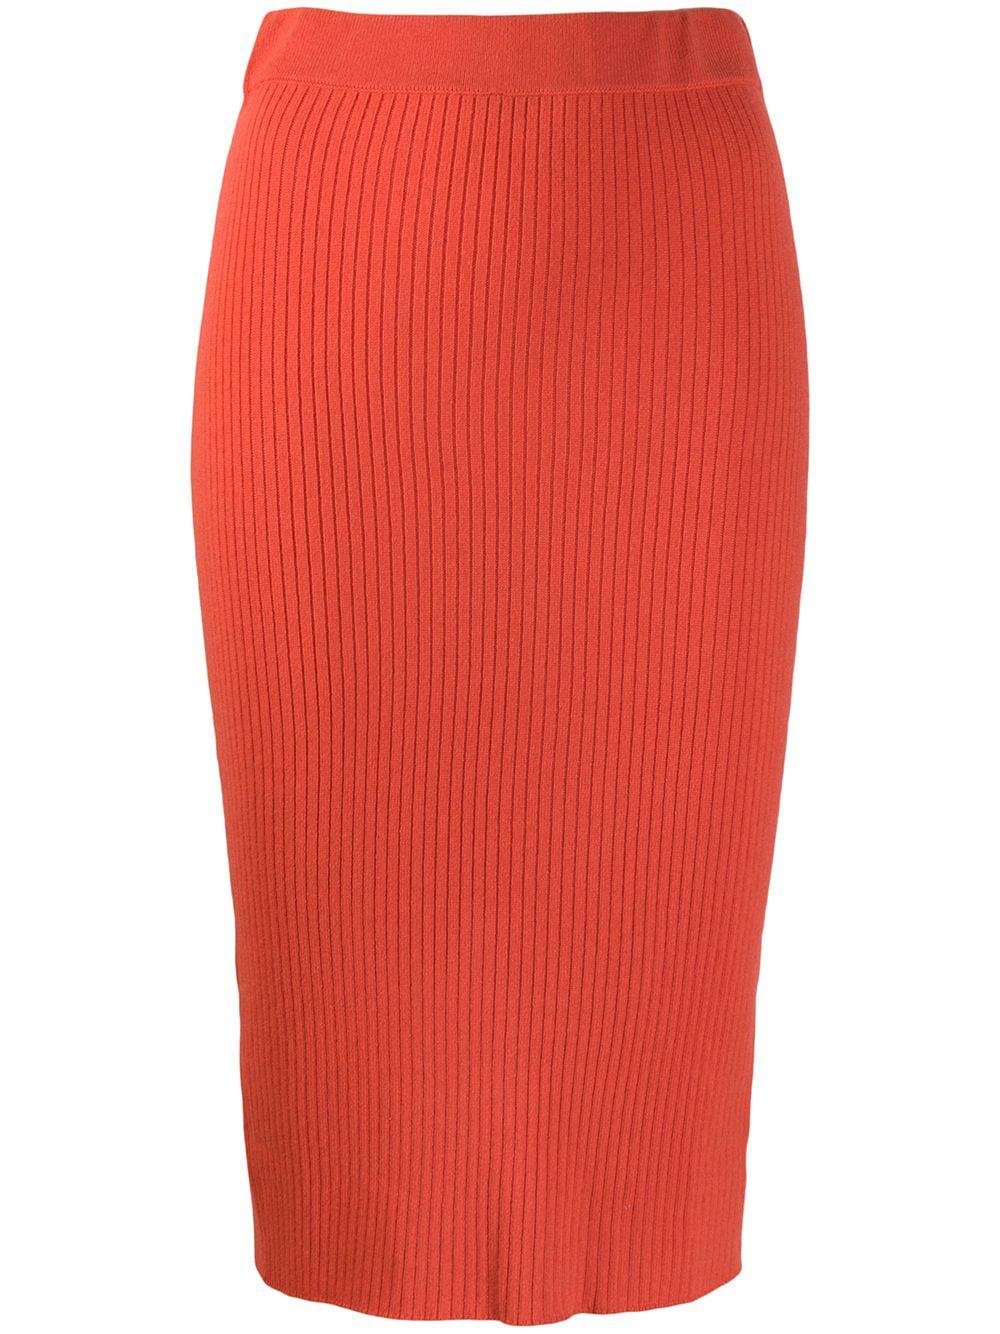 ribbed knitted skirt by CASHMERE IN LOVE